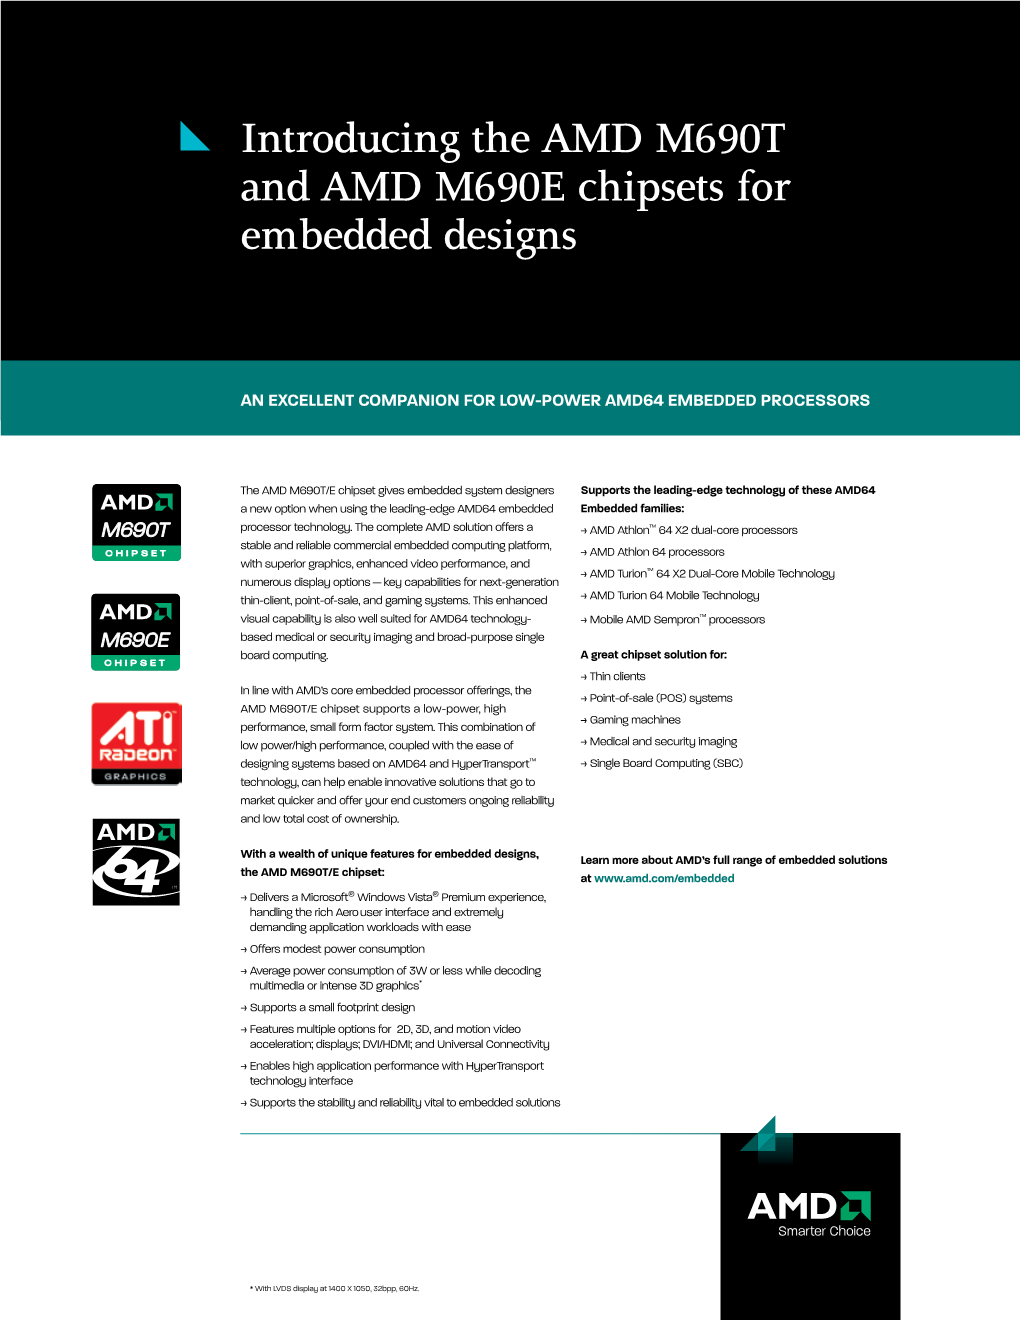 AMD M690T/M690E Chipsets Product Brief